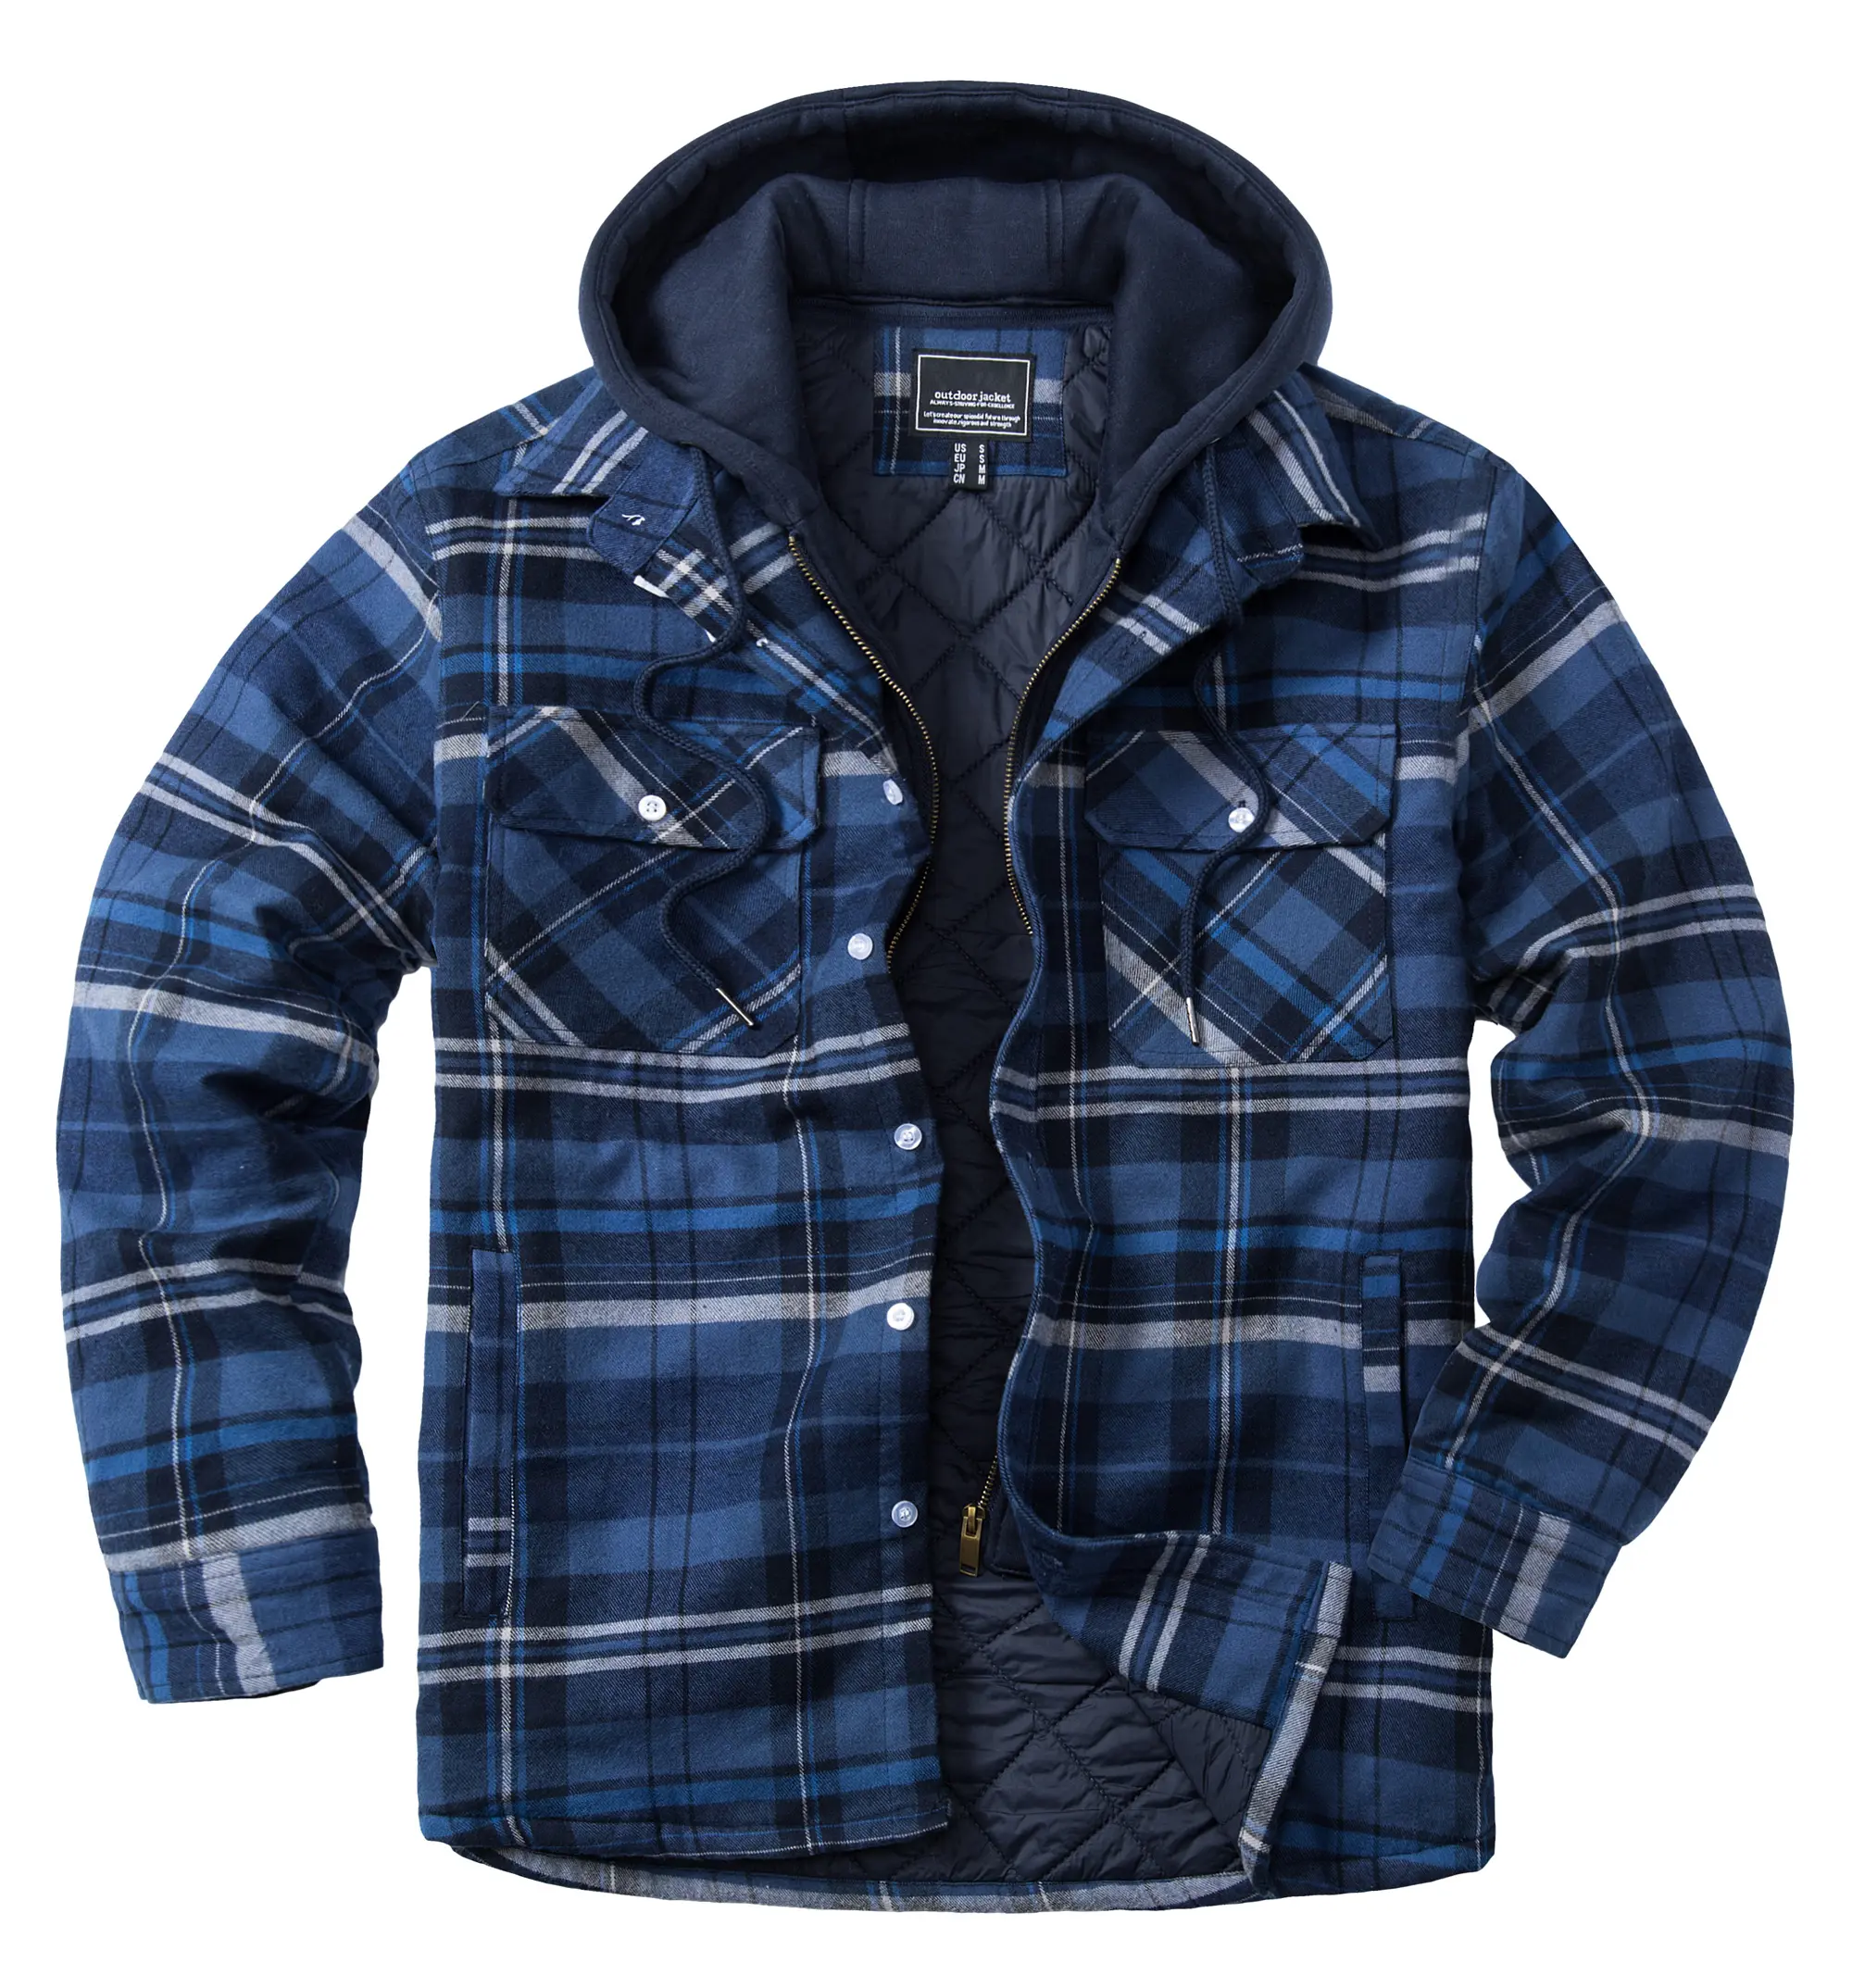 Winter Cotton Plaid Shirts Coats Removable Hood Warm With Inner Pocket Long Sleeve Outerwear Flannel Shirts For Men